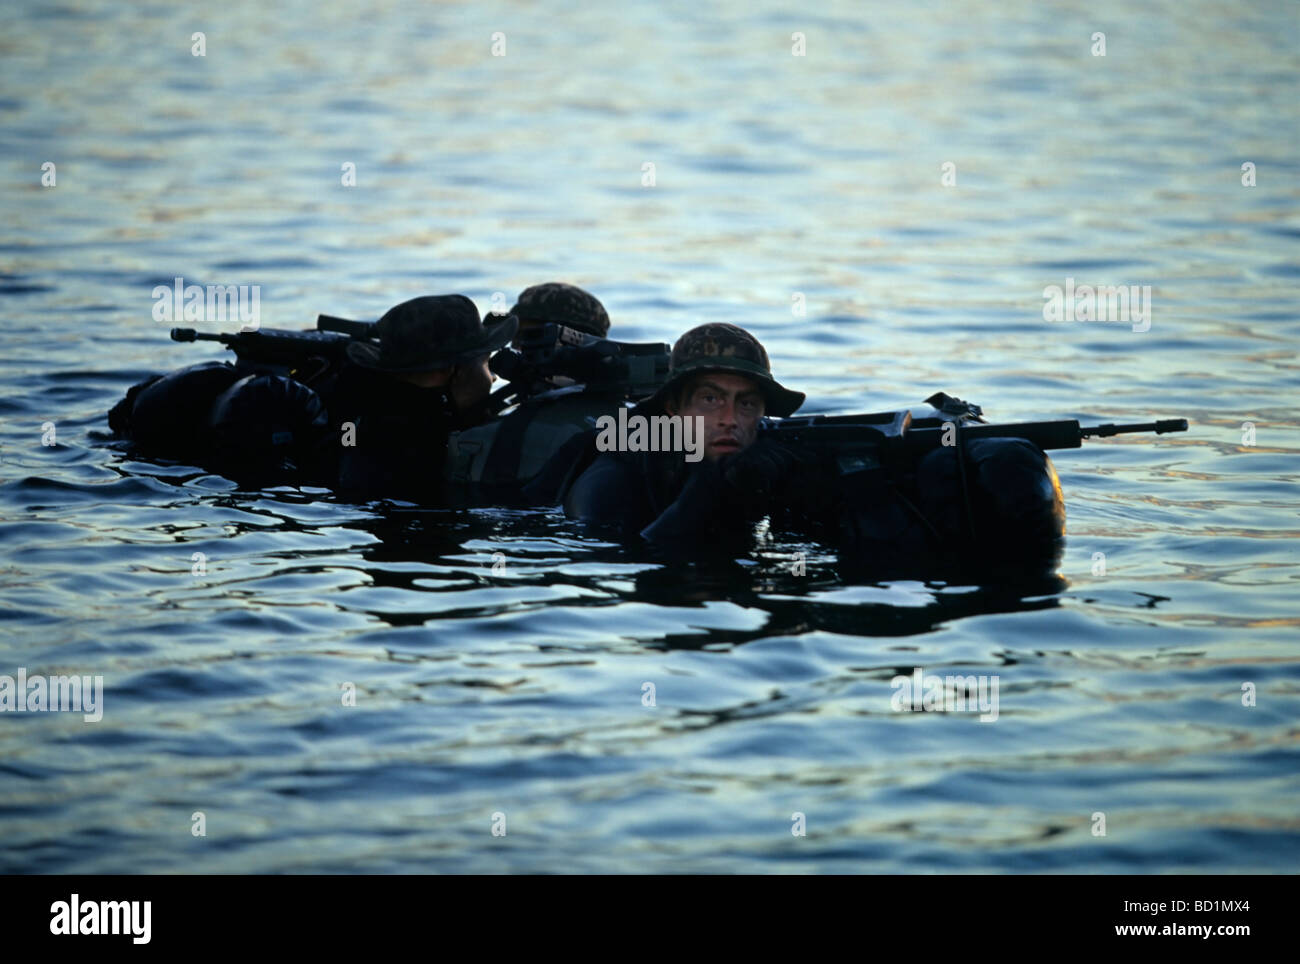 Armed Soldiers of the German special forces 'Kampfschwimmerkompanie' waiting on the surface of the sea for helicopter pickup, E Stock Photo